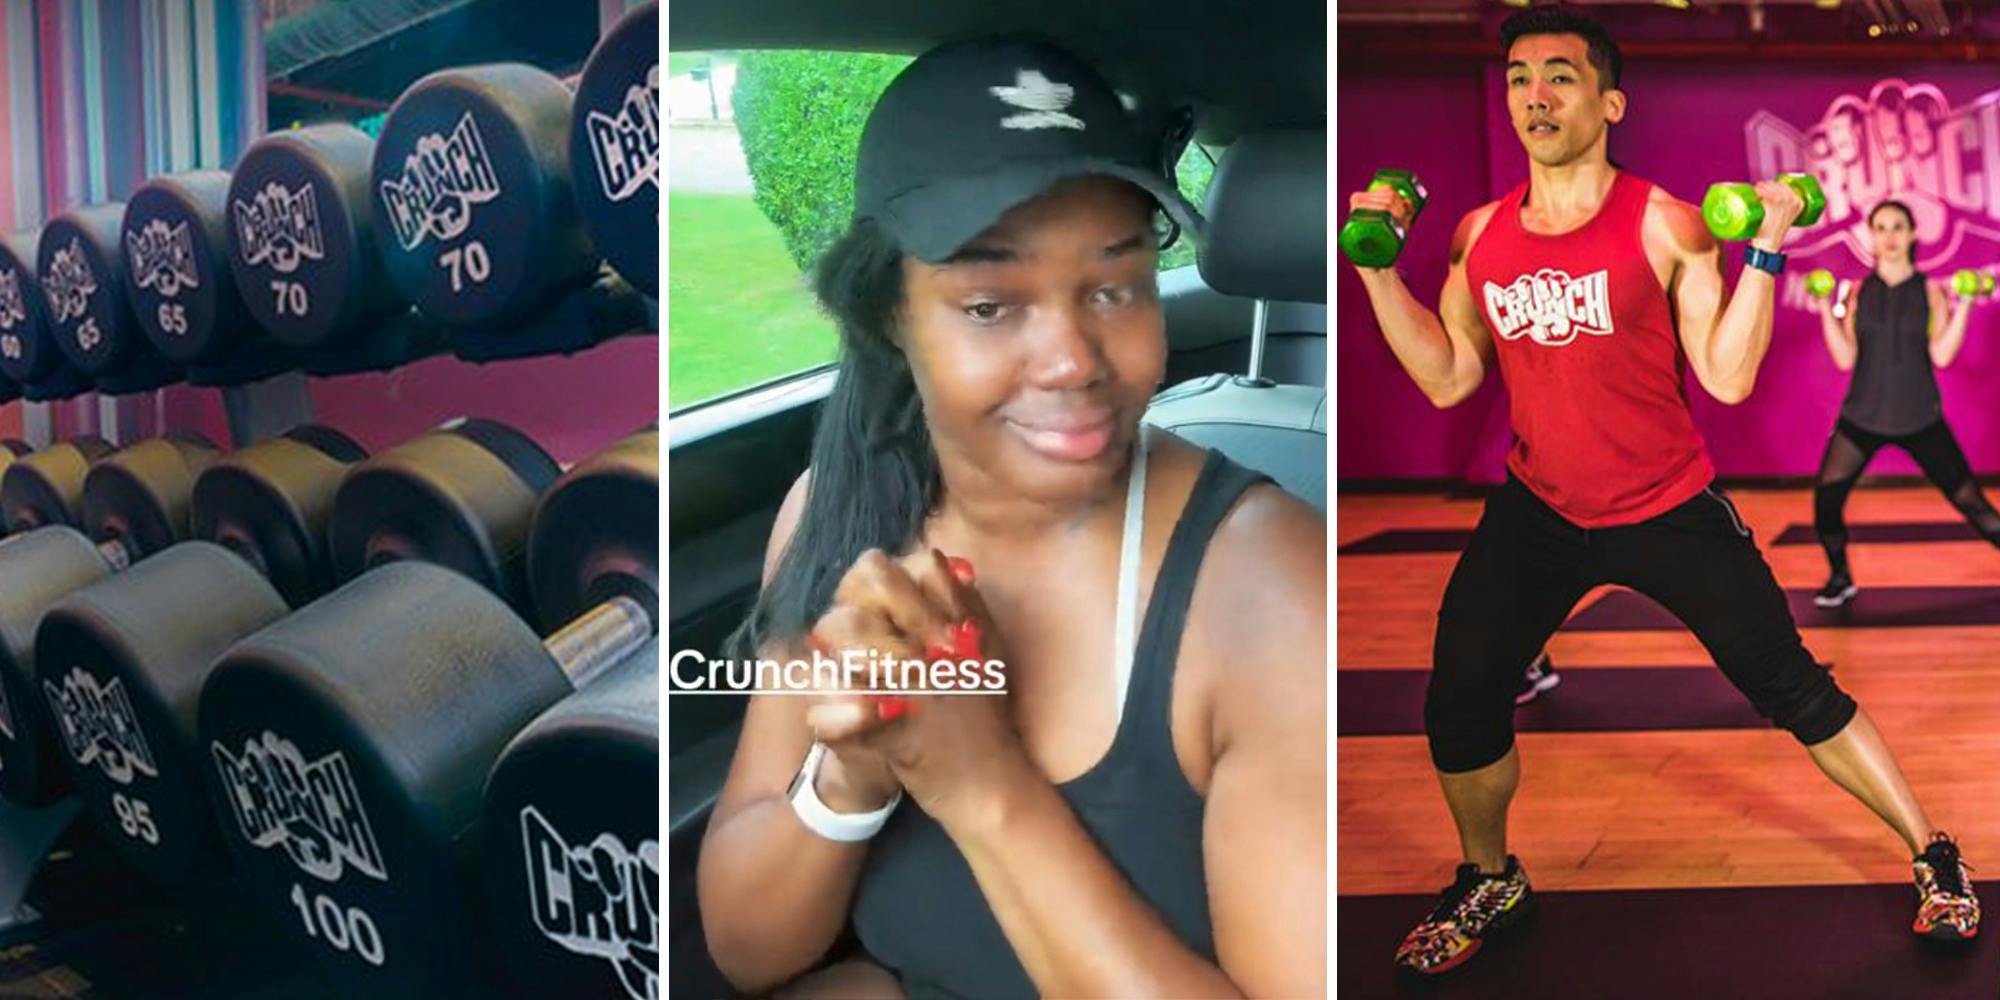 ‘She pays $4,000 a month’: Customer warns against Crunch Fitness after ‘embarrassing’ interaction with ‘disgusting’ trainer